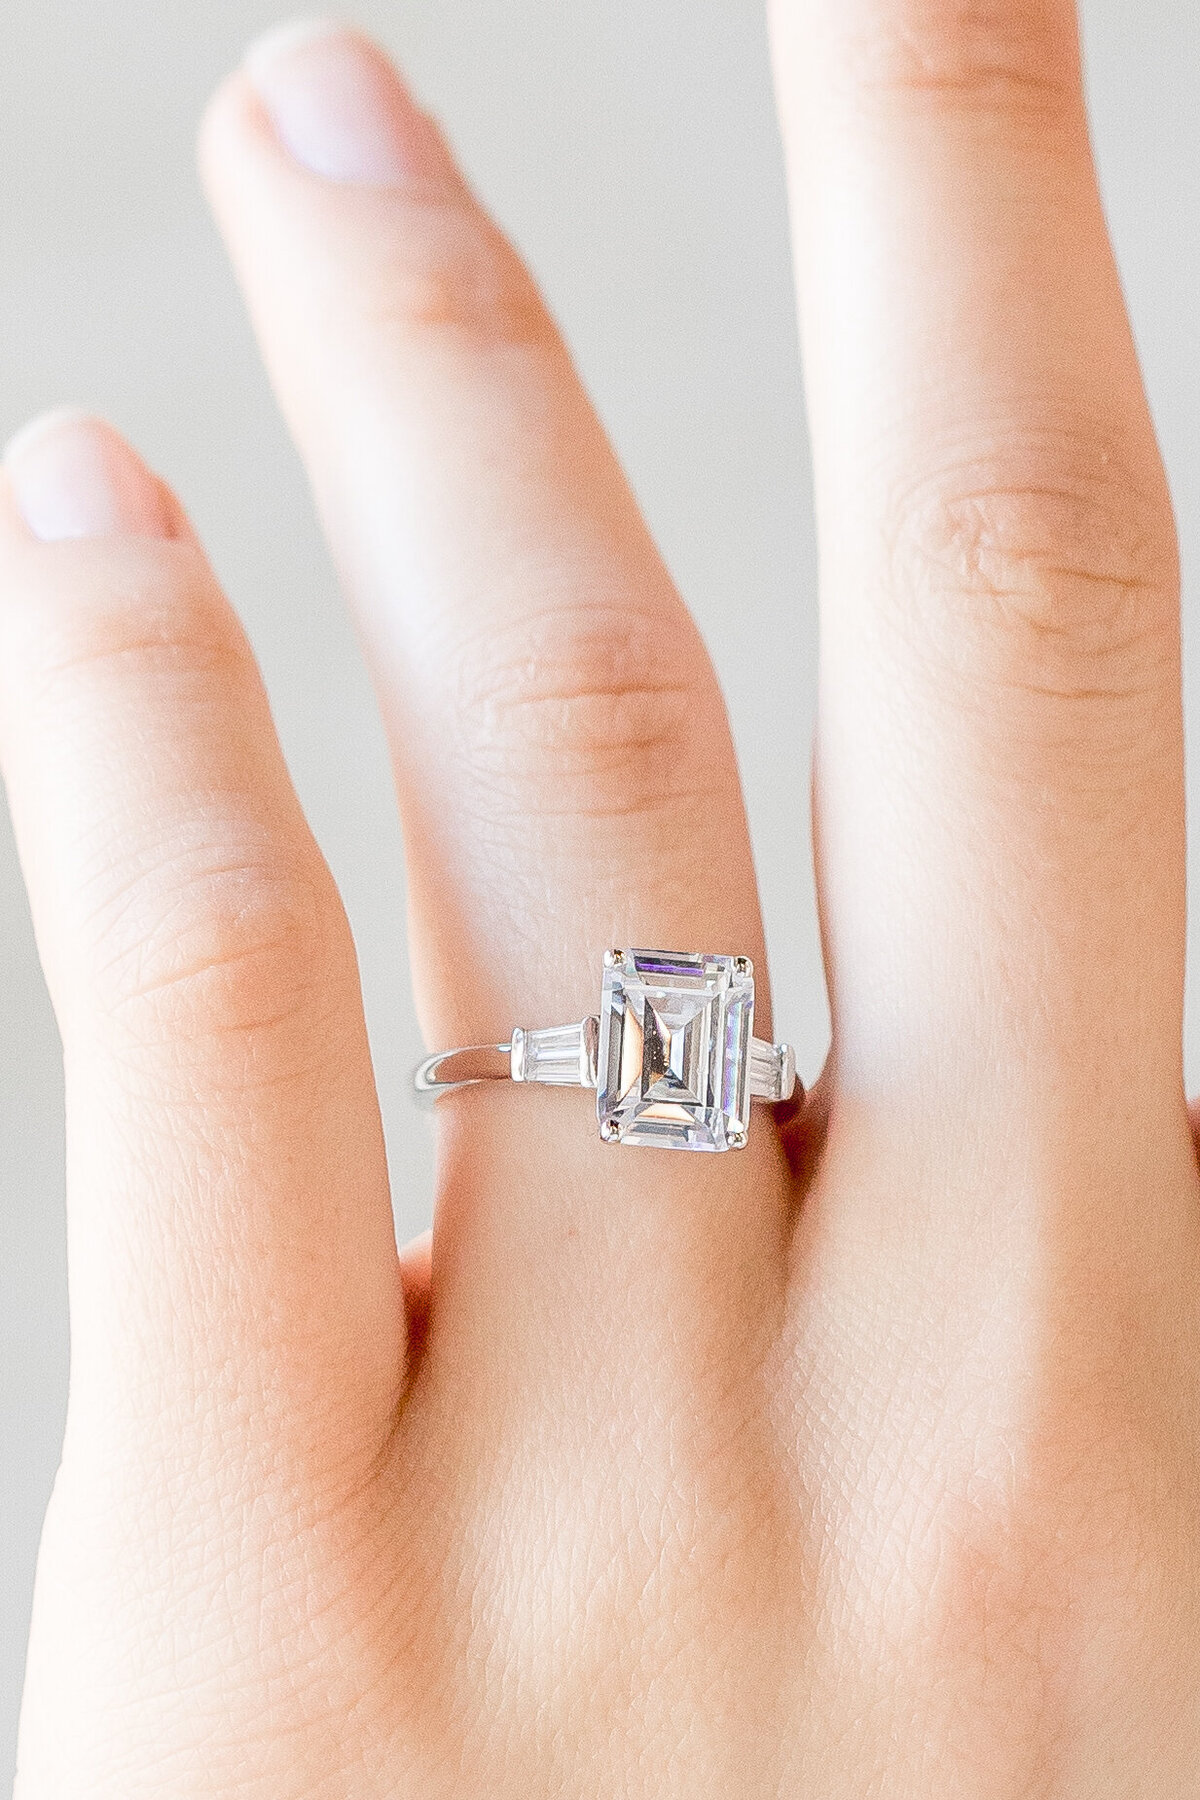 close up of a ring on a woman's finger